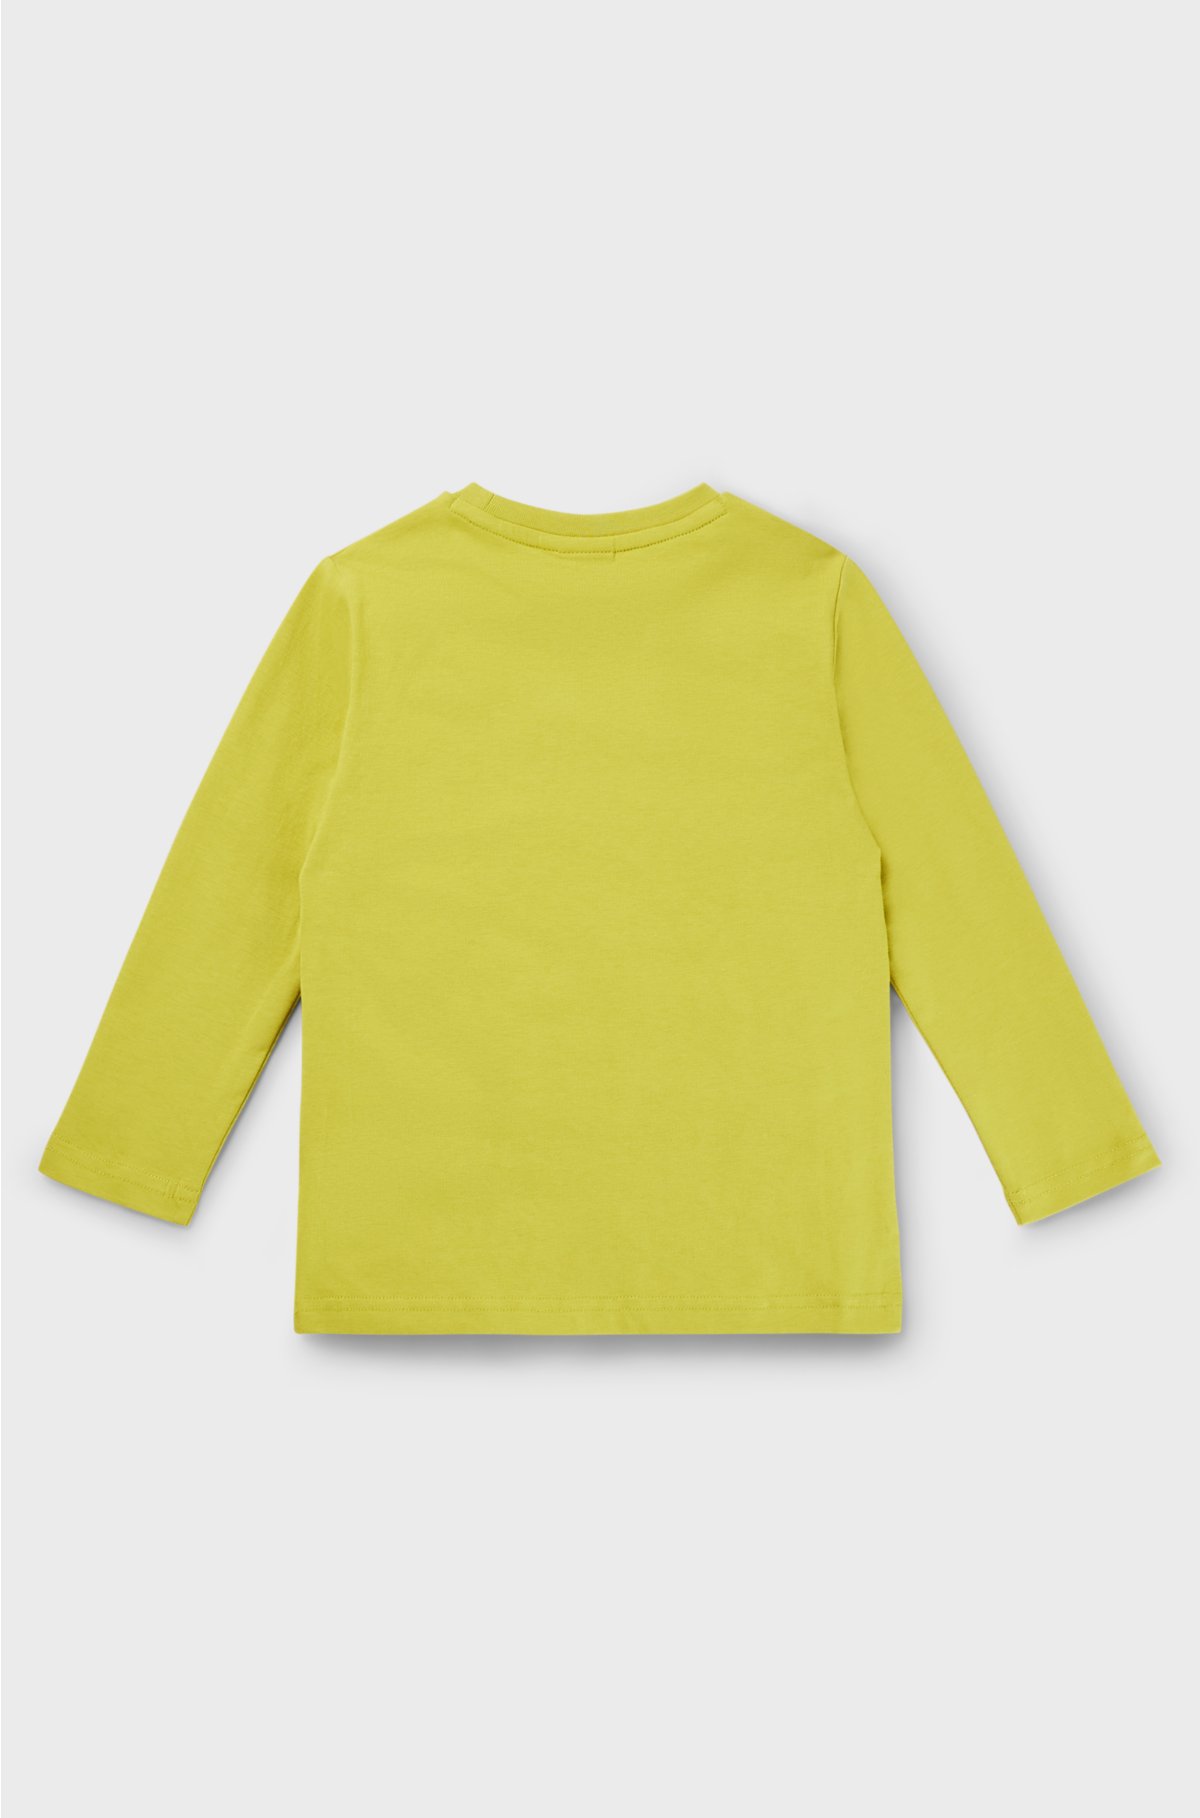 Kids' long-sleeved T-shirt in cotton with logo print, Green